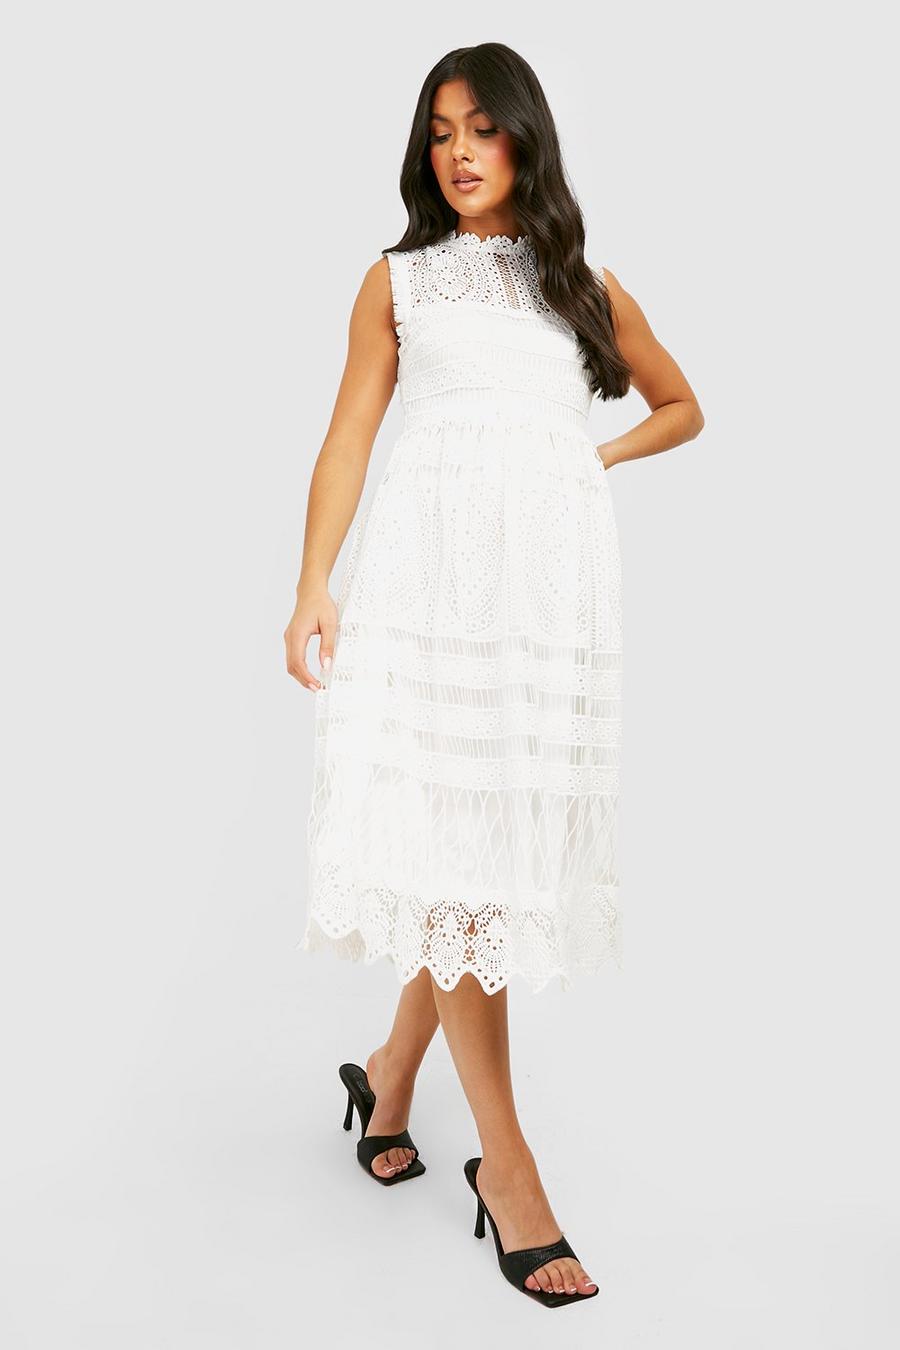 Ivory white Maternity Boutique Lace Skater Dress